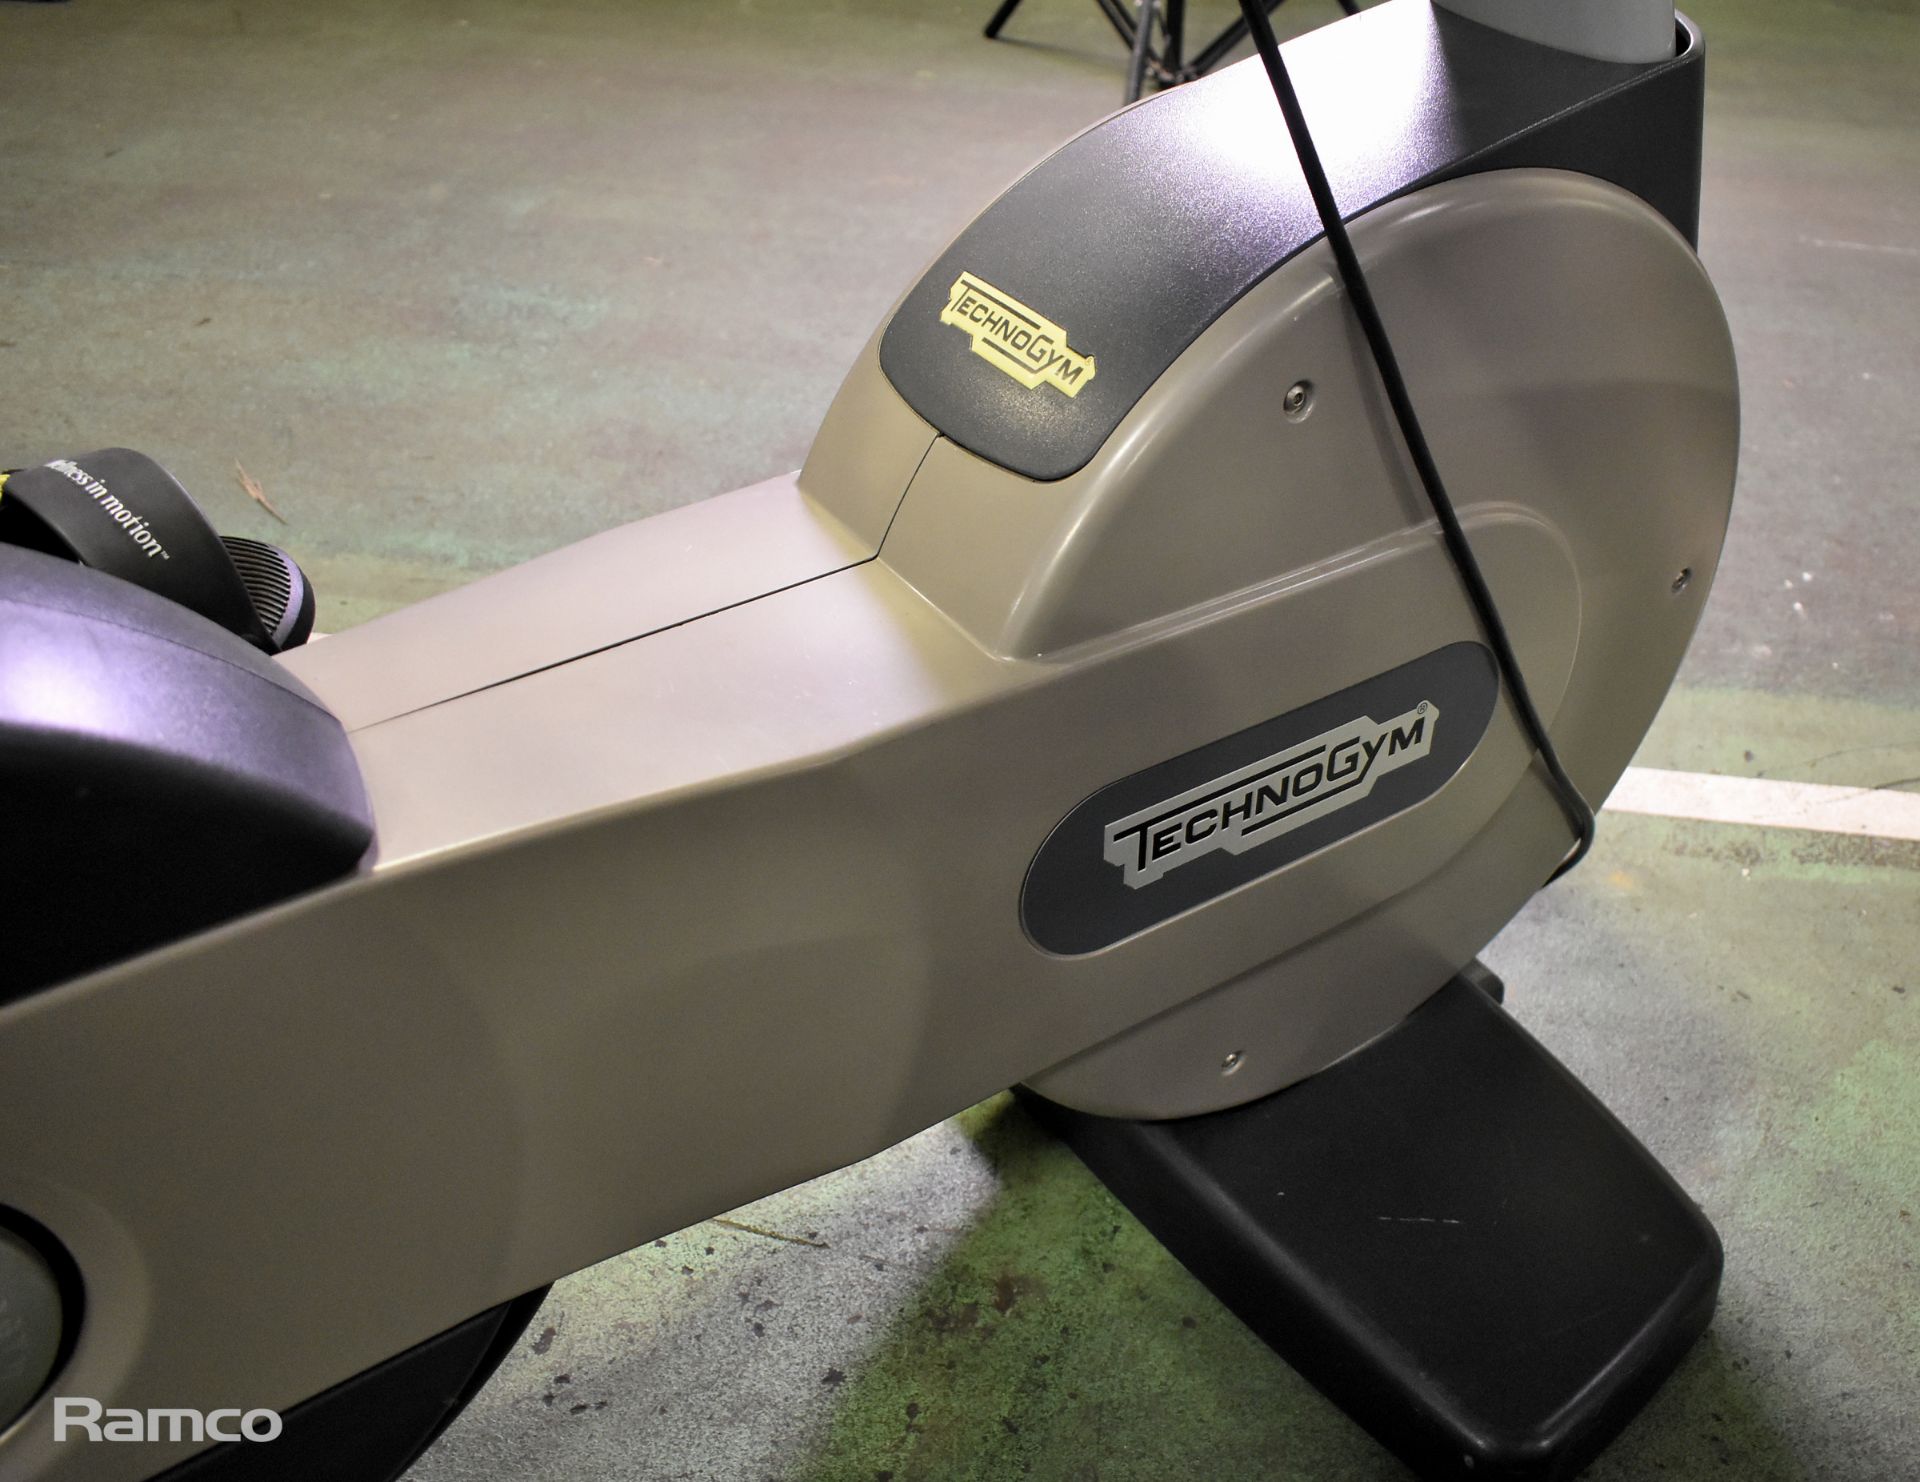 TechnoGym static exercise bike - W 550 x D 1210 x H 1380mm - Image 4 of 7